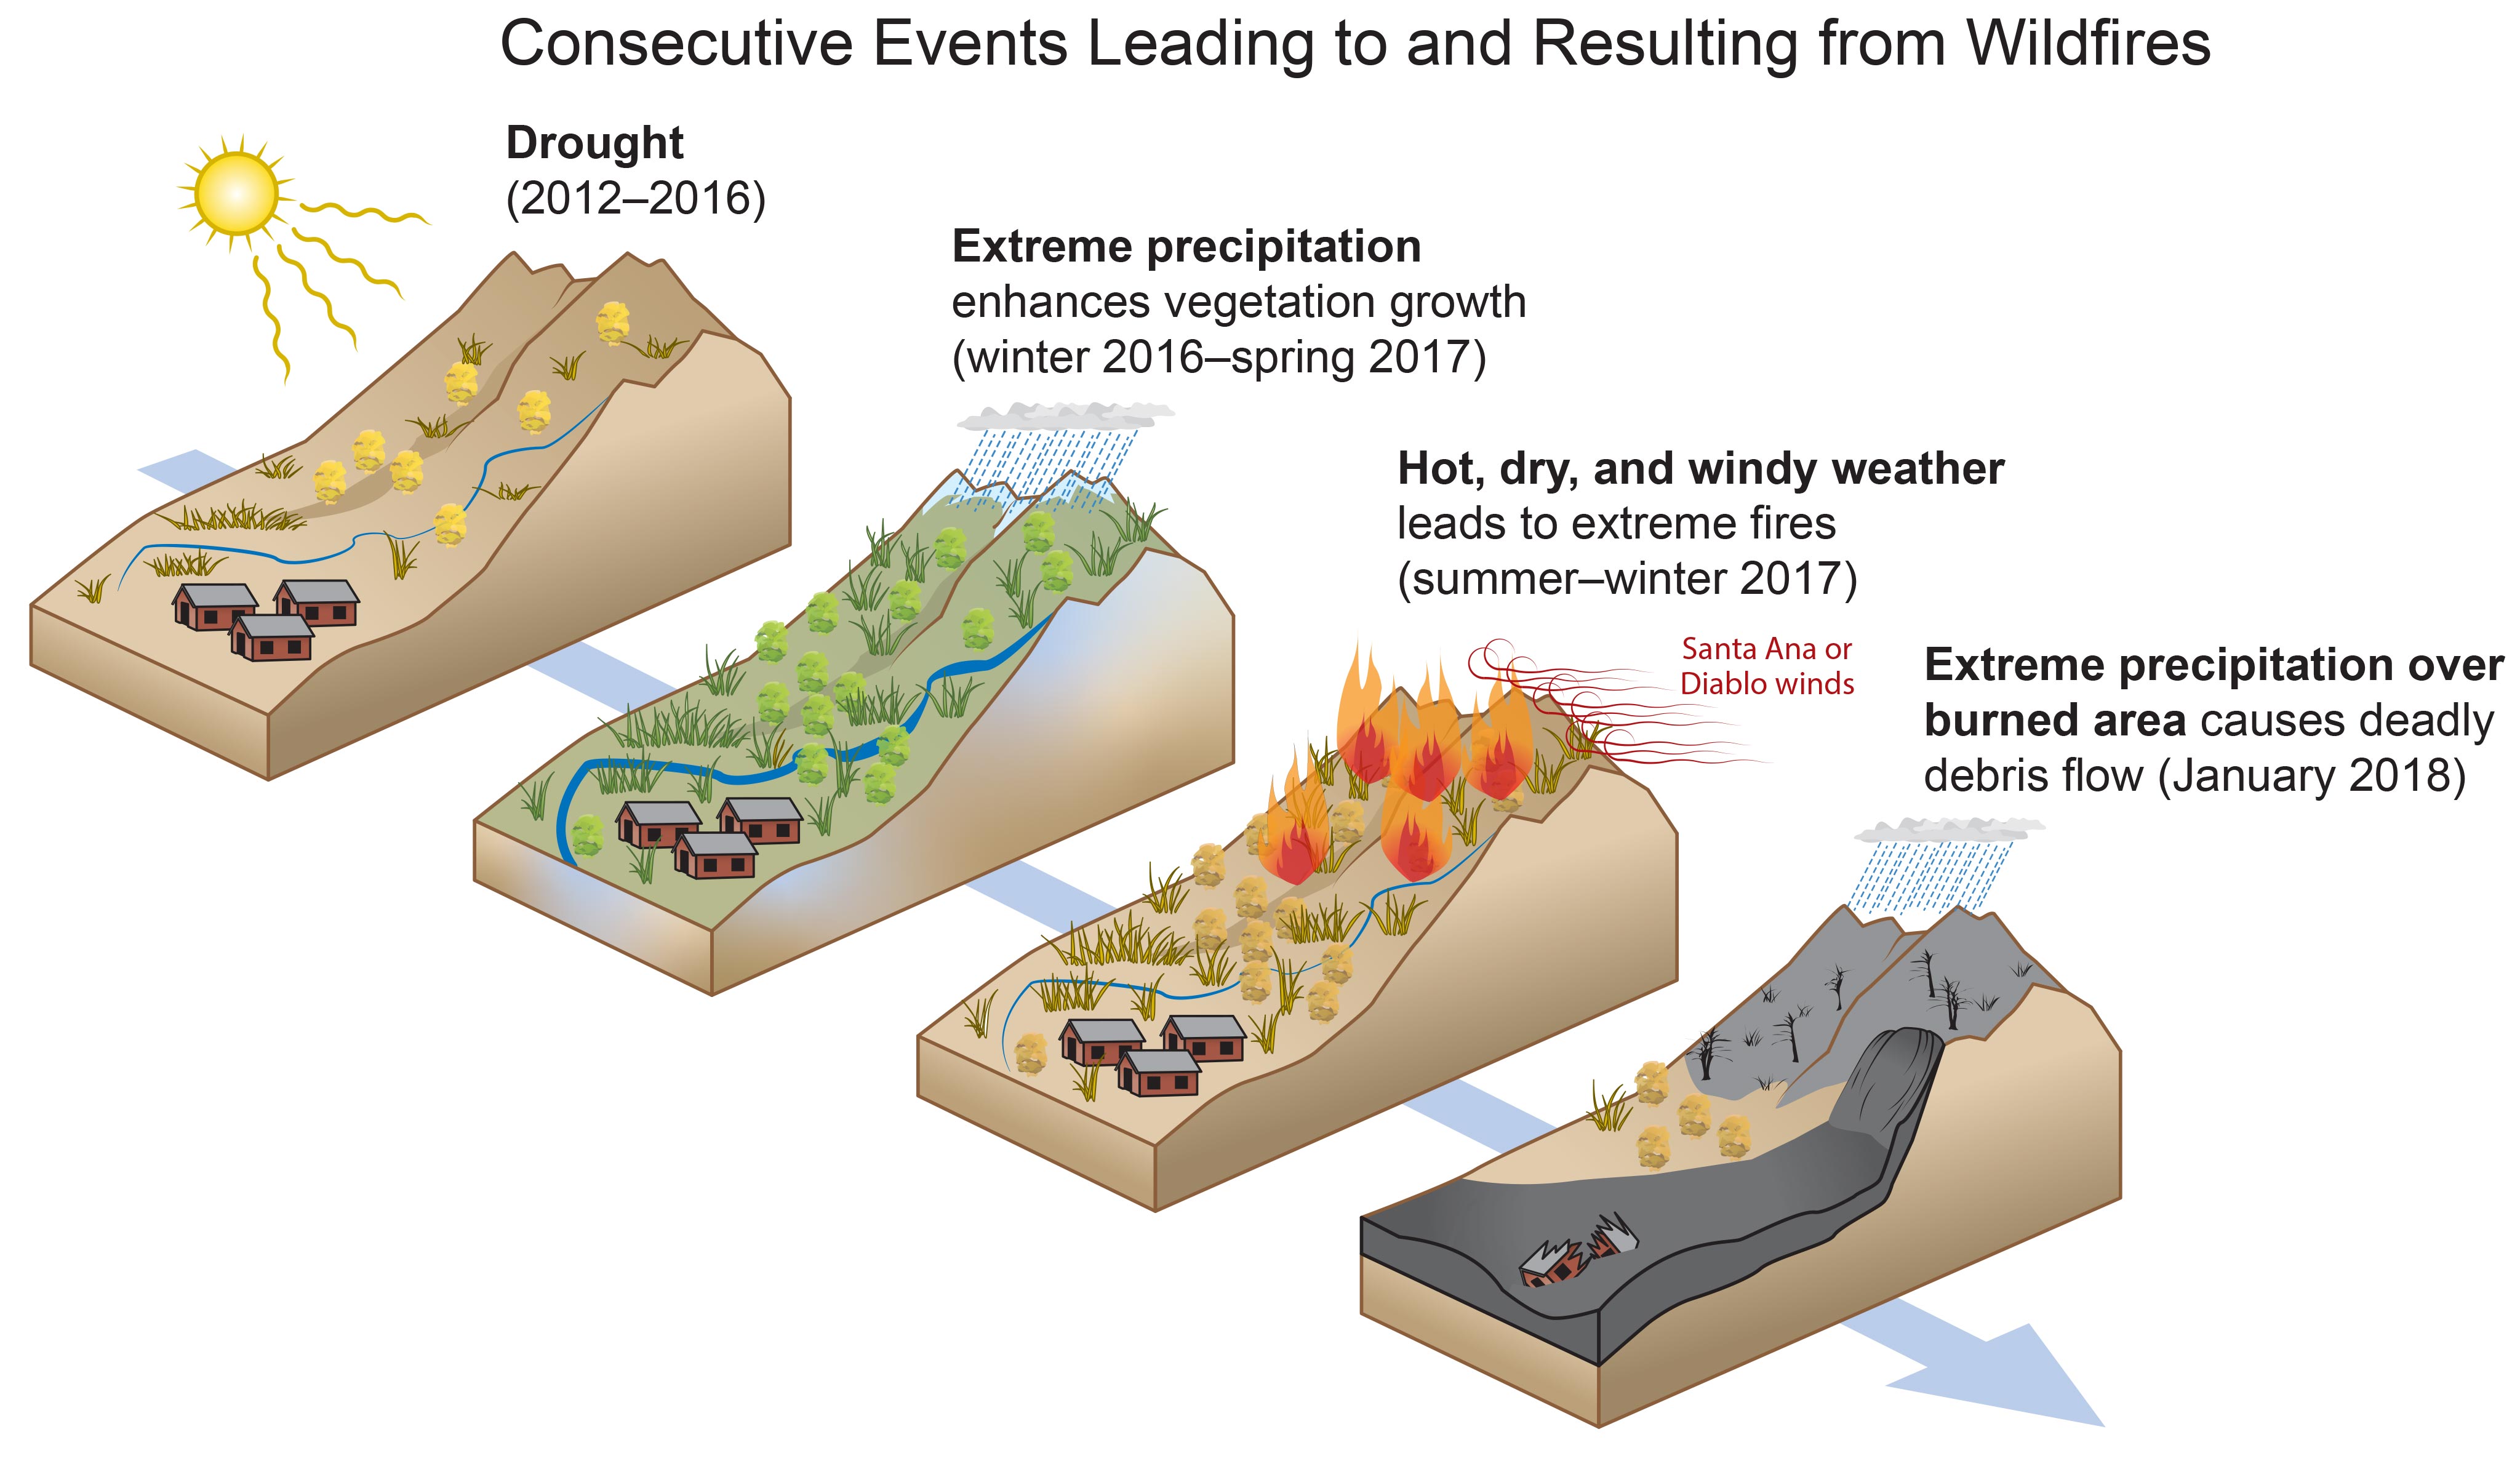 Consecutive Events Leading to and Resulting from Wildfires